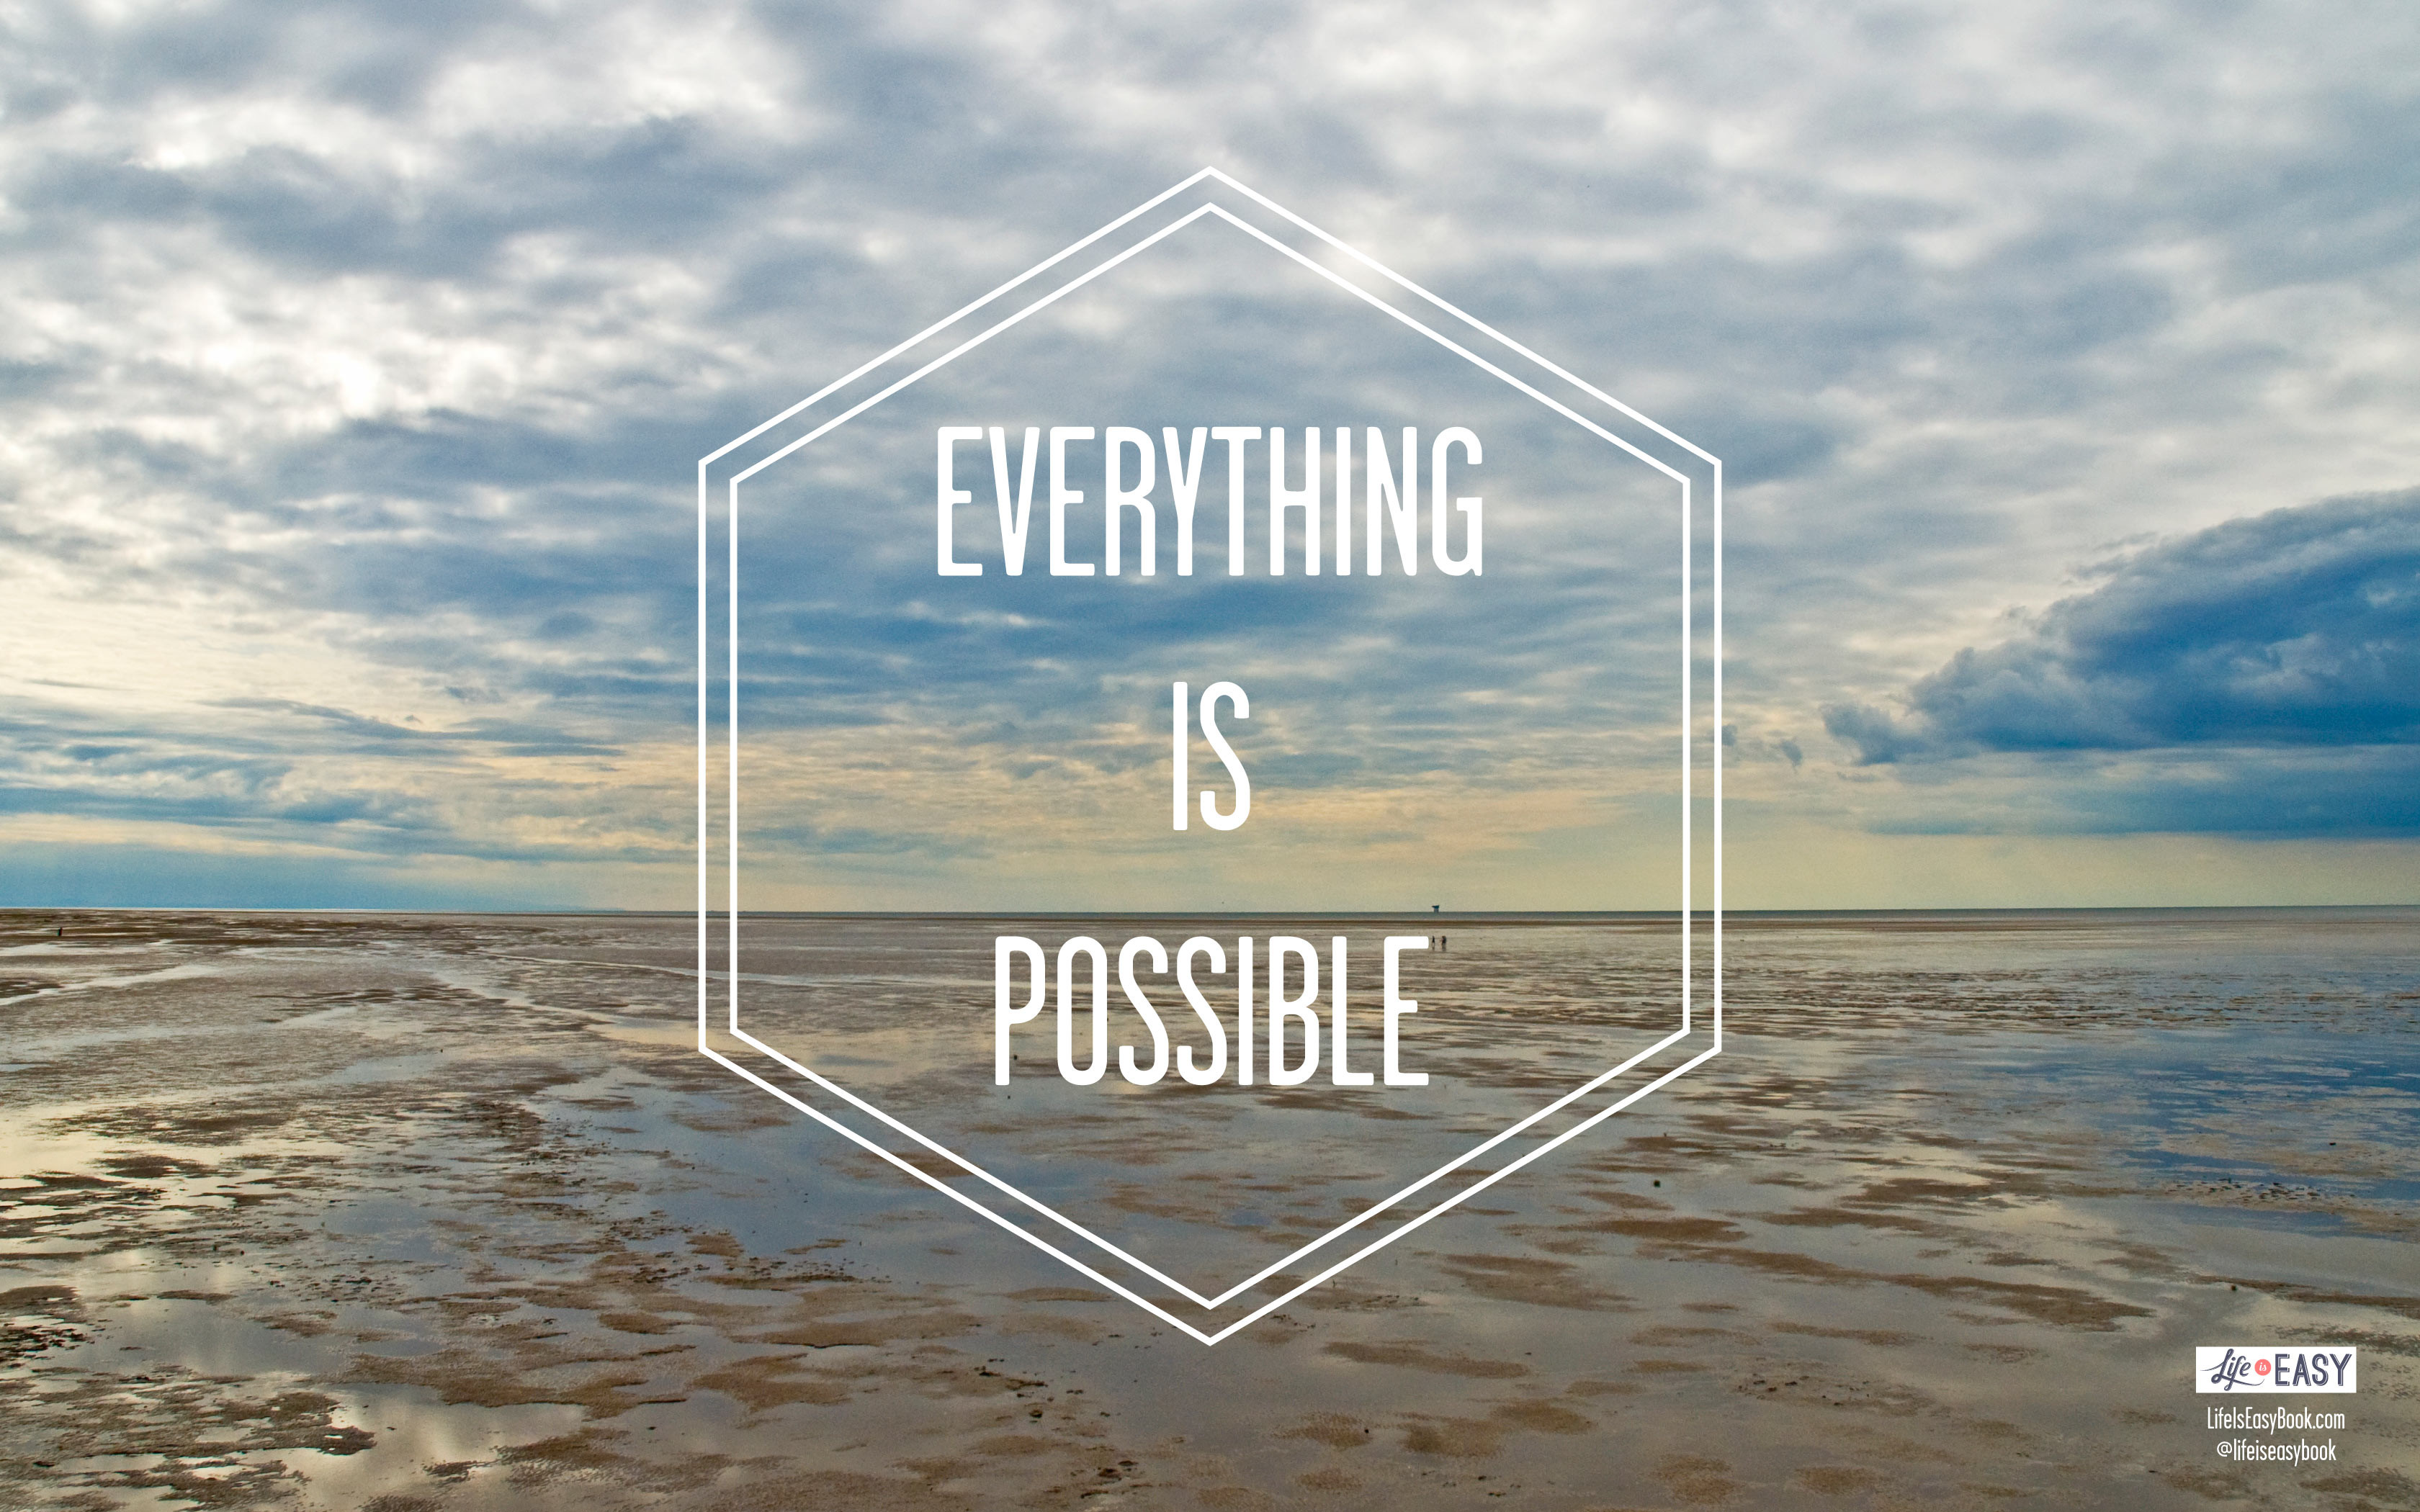 3360x2100 everything-is-possible-wallpaper-16-9-from-lifeiseasybook